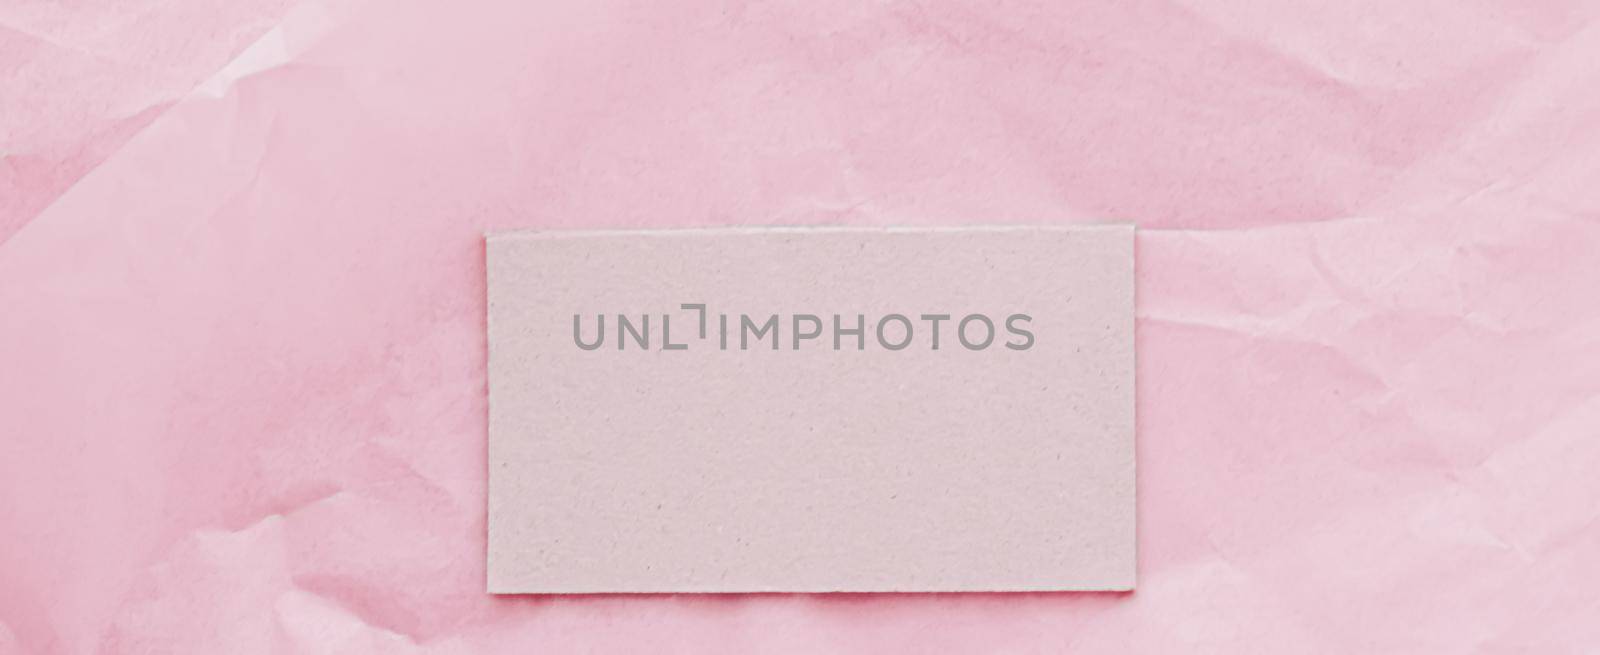 Business card flatlay on pink tissue paper background, luxury branding flat lay and brand identity design for mockup by Anneleven